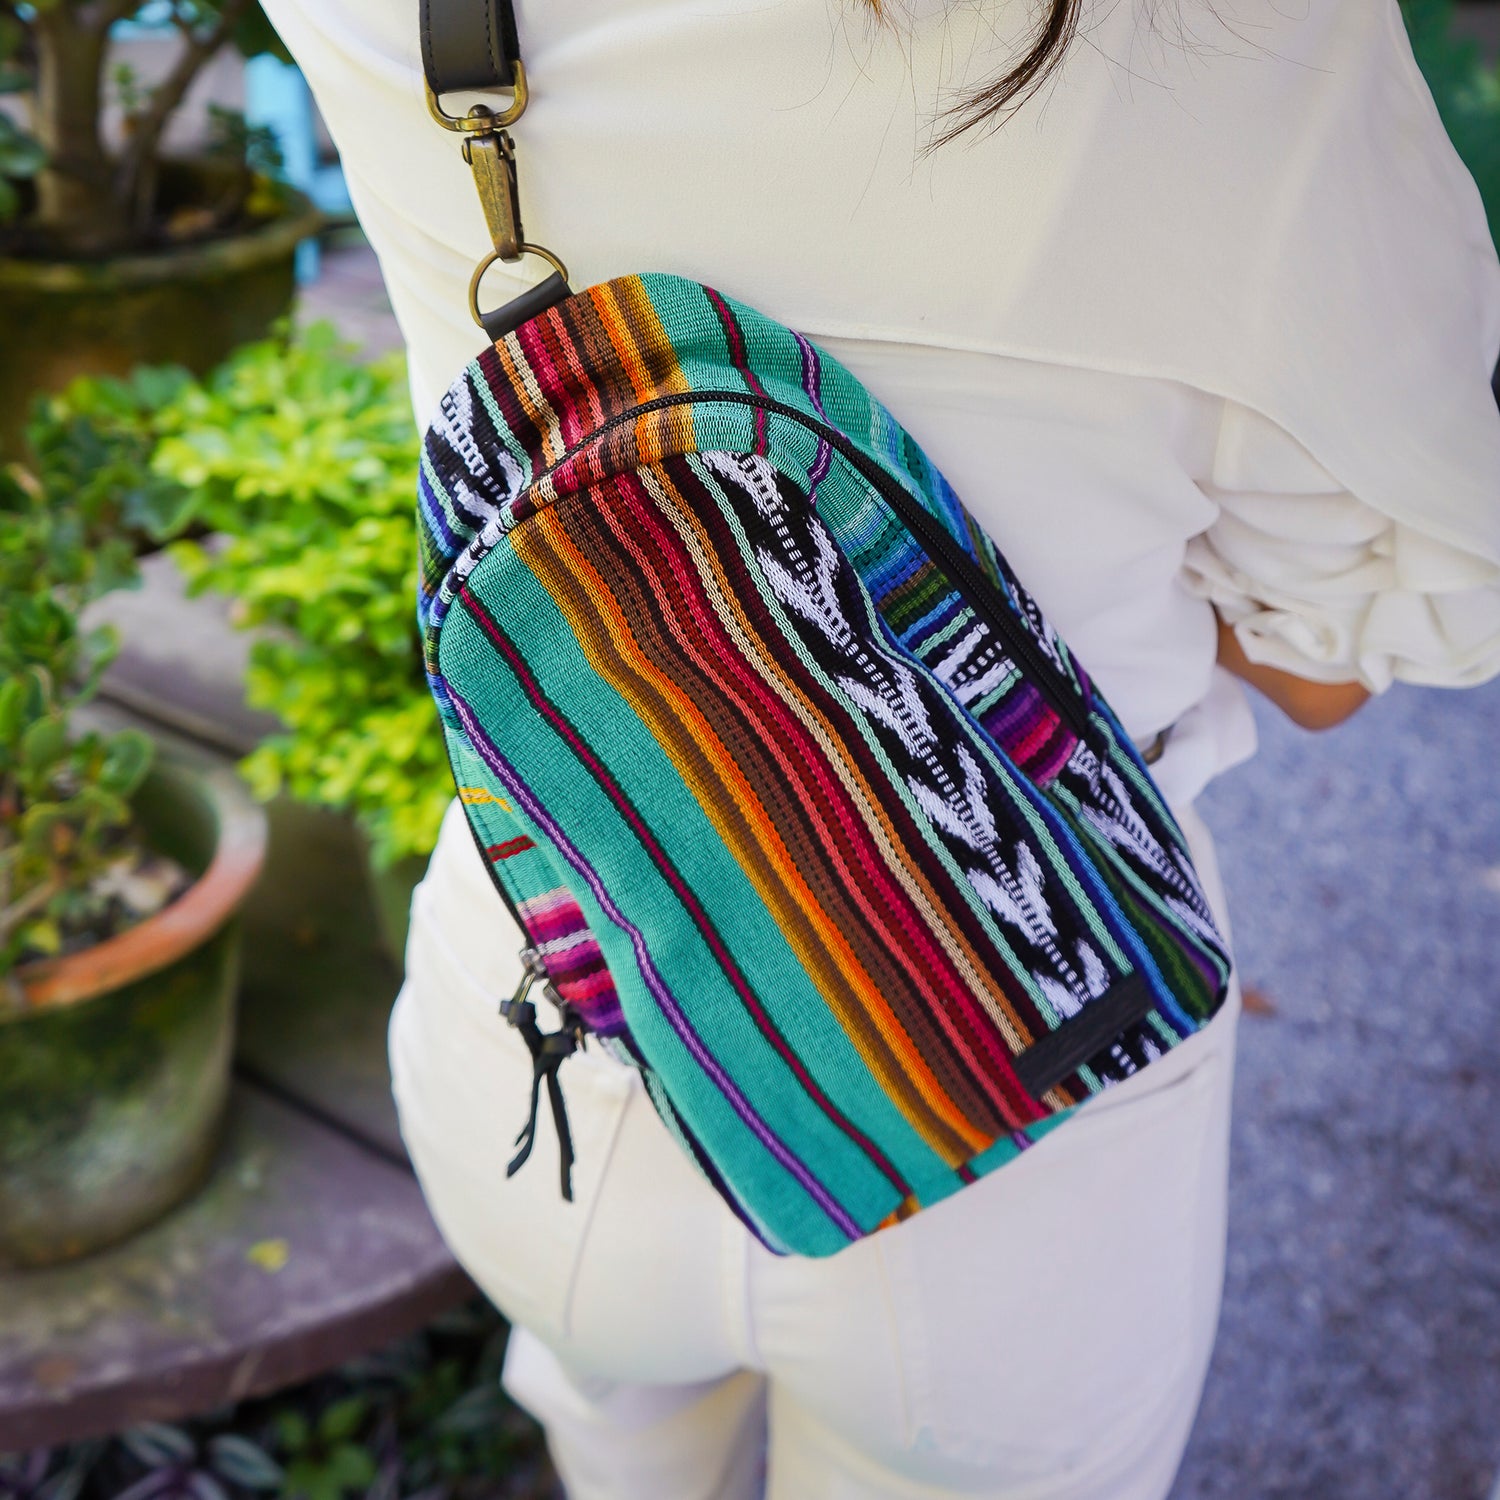 Hippie Bag - Woven – Shop with a Mission